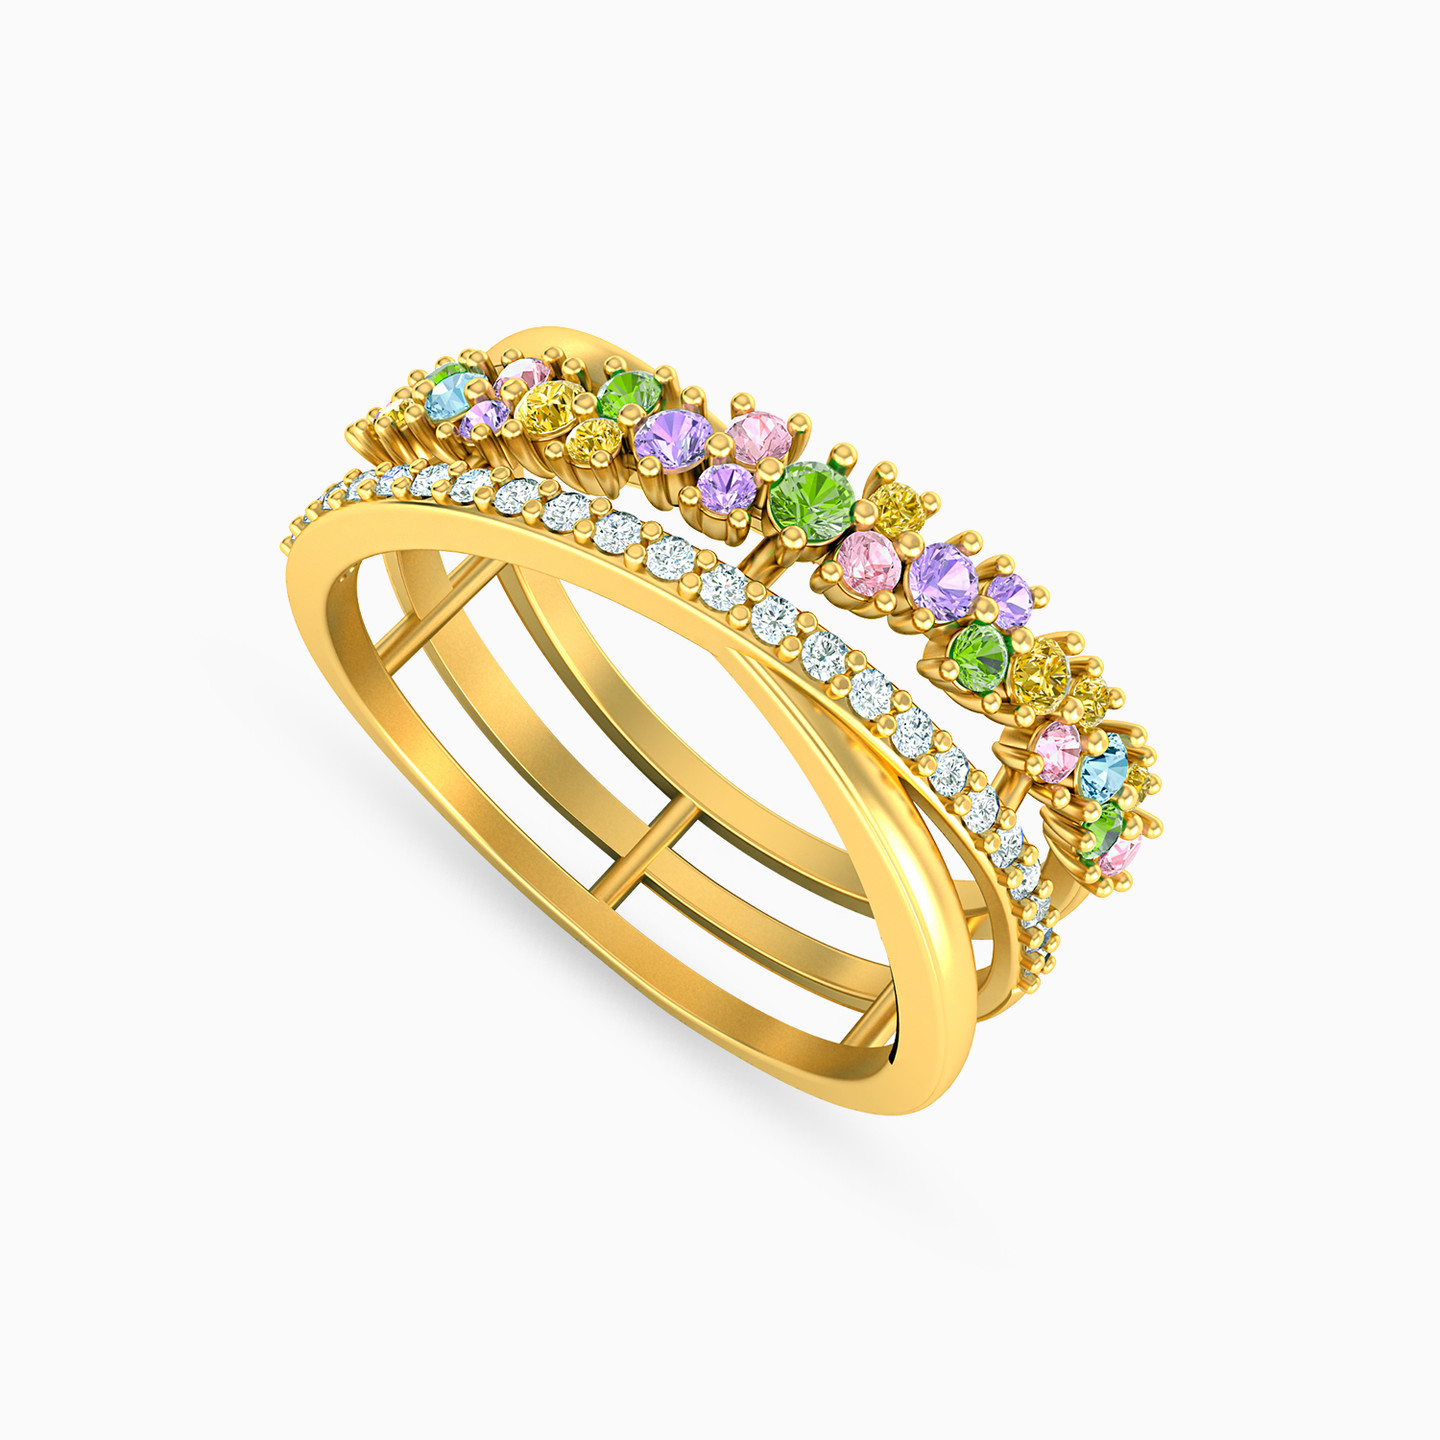 18K Gold Colored Stones Band Ring - 2